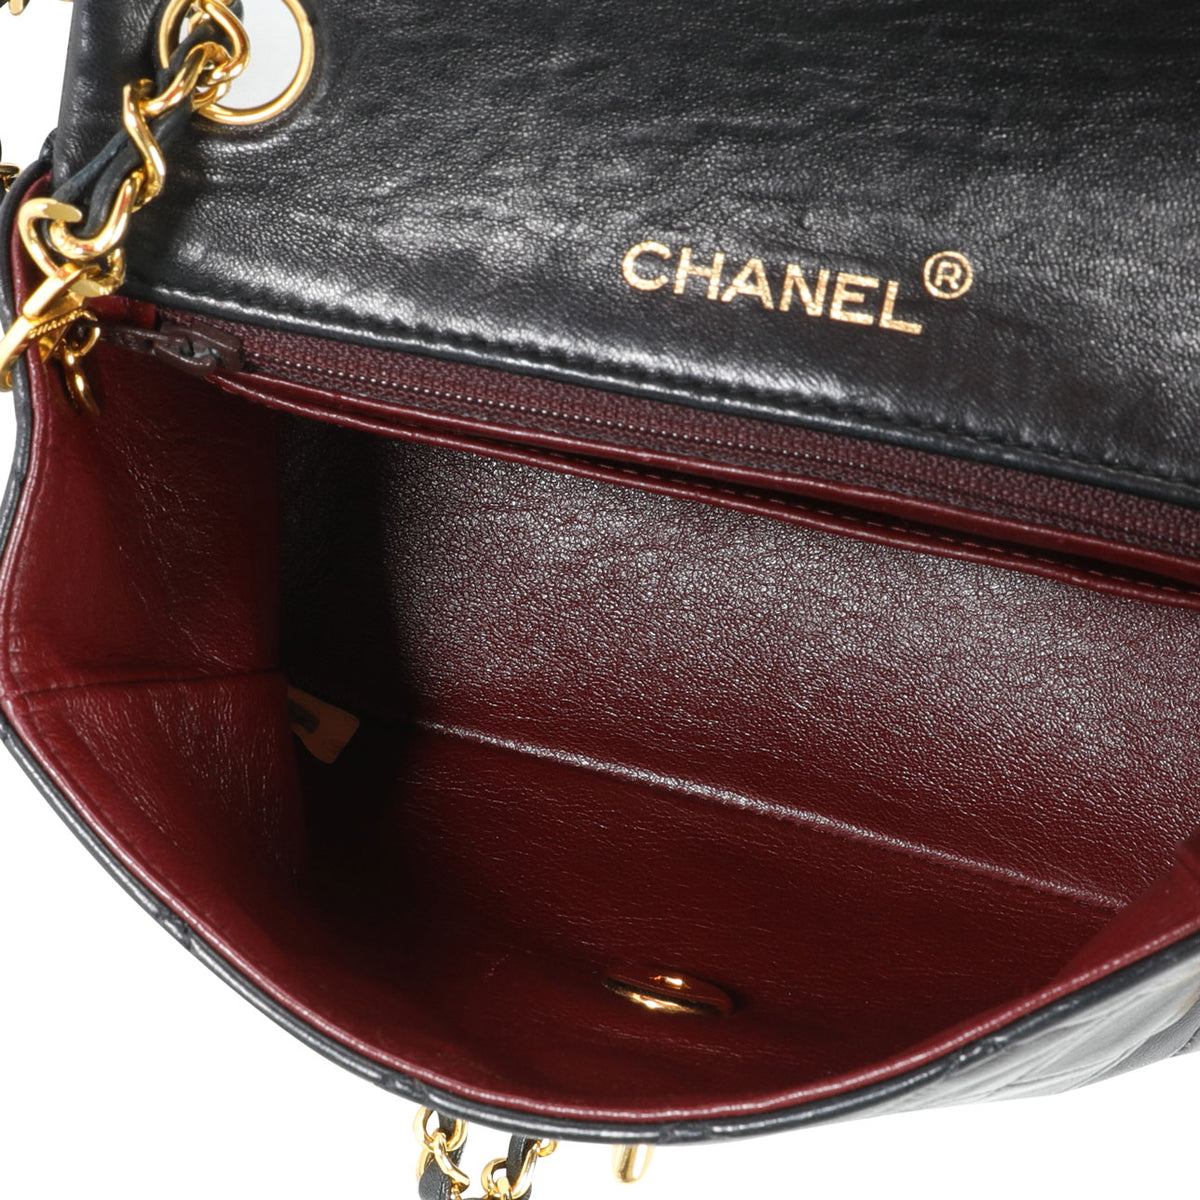 Chanel Vintage Black Quilted Lambskin Mini Square Classic Flap Bag, myGemma